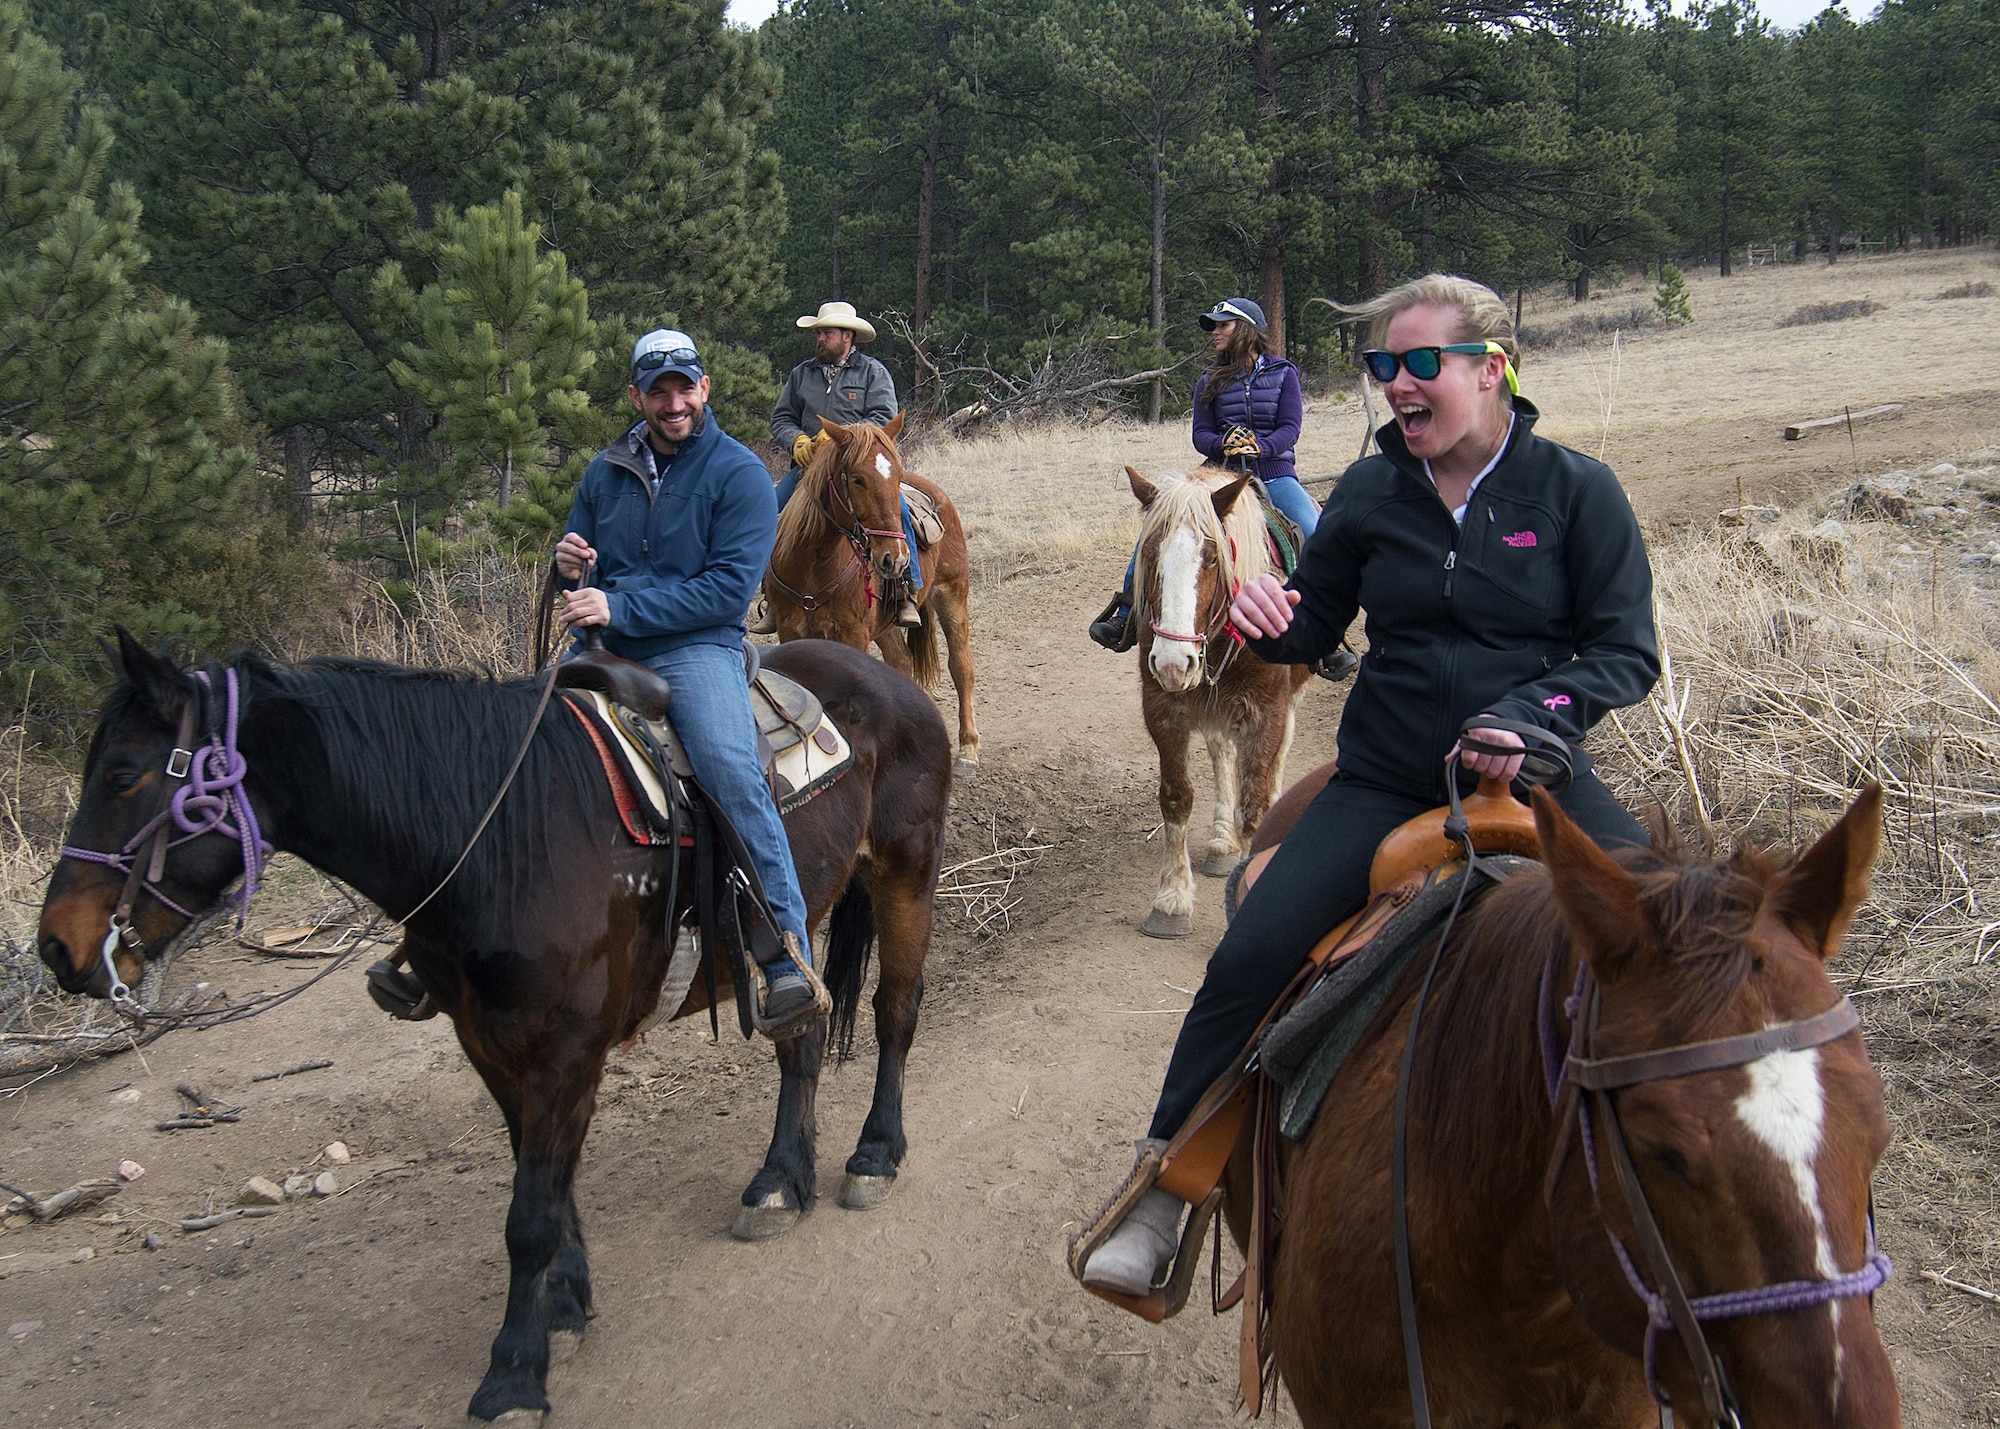 Senior Airman Rachel Silverberg and Joe Harvey, both with the 90th Force Support Squadron, share a laugh during a trail ride outside of Estes Park, Colo., March 13, 2016. Harvey served as trip leader for F.E. Warren Air Force Base Outdoor Recreation-sponsored group of Airmen, retirees and dependents. (U.S. Air Force photo by R.J. Oriez)